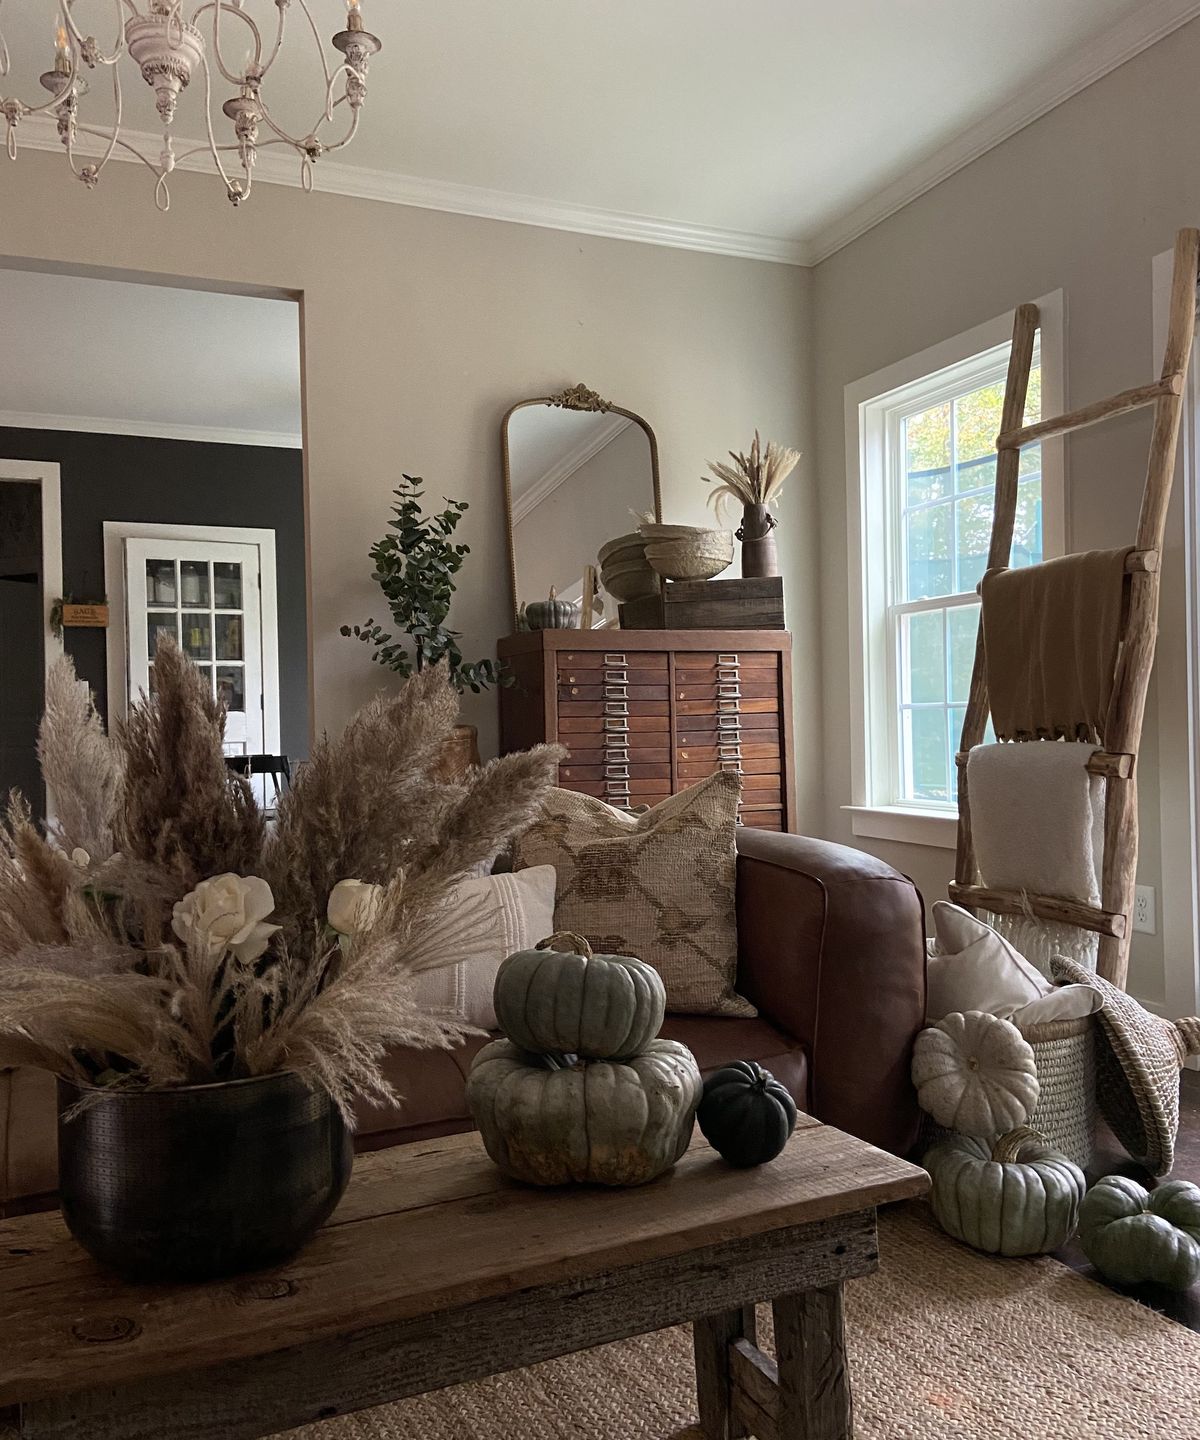 21 Thanksgiving decorating ideas that are easy to recreate